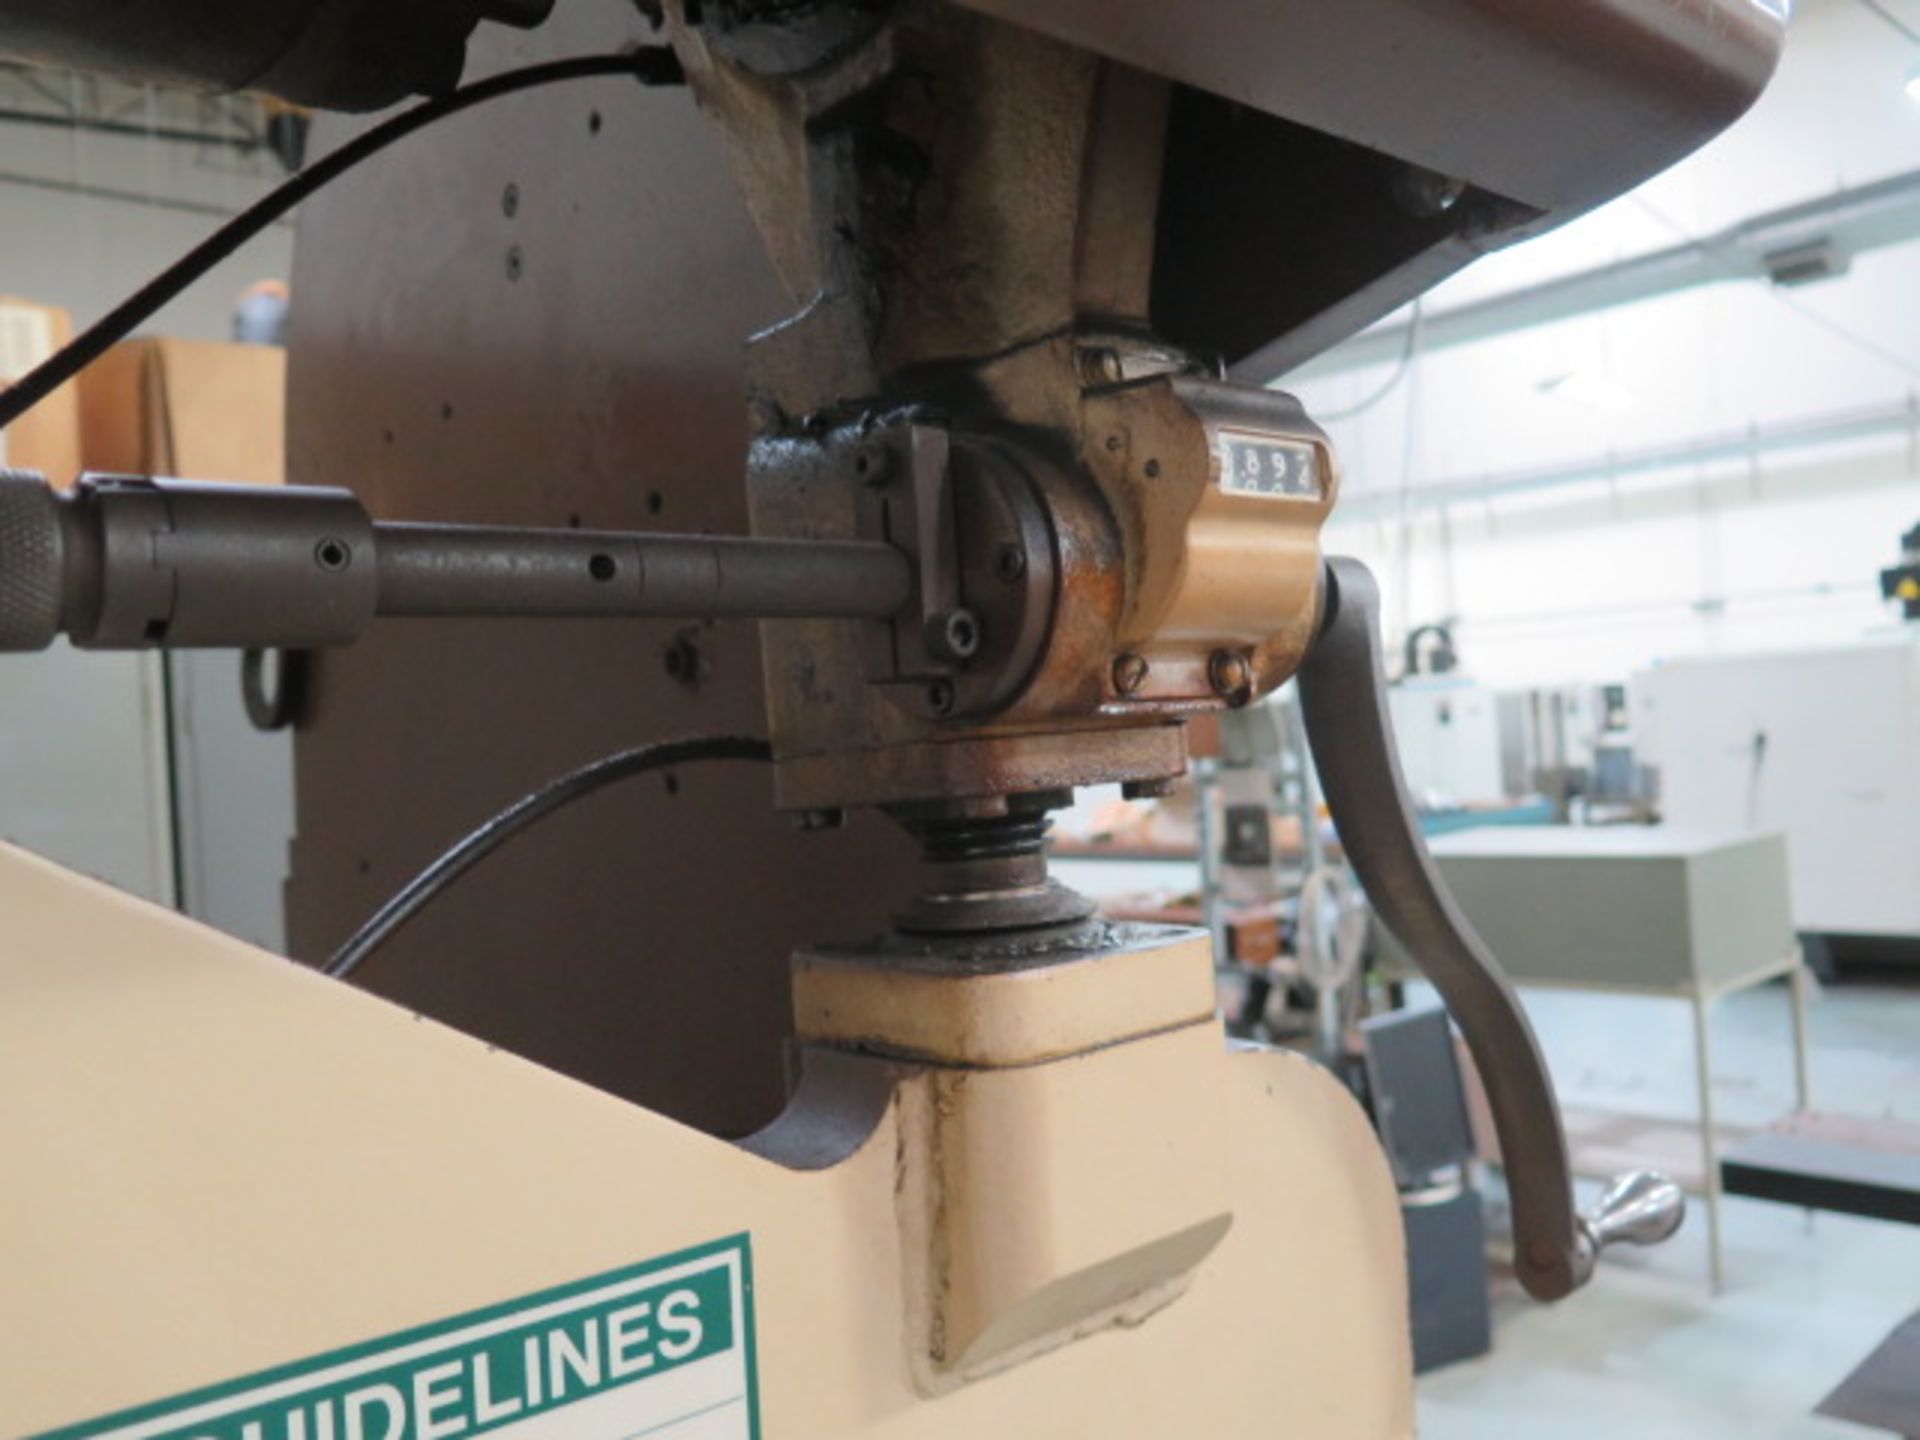 DiAcro 4-7272” Press Brake w/ Dial Back Gage, 72” Length, This Item is Sold AS IS and NO Warranty. - Image 9 of 10